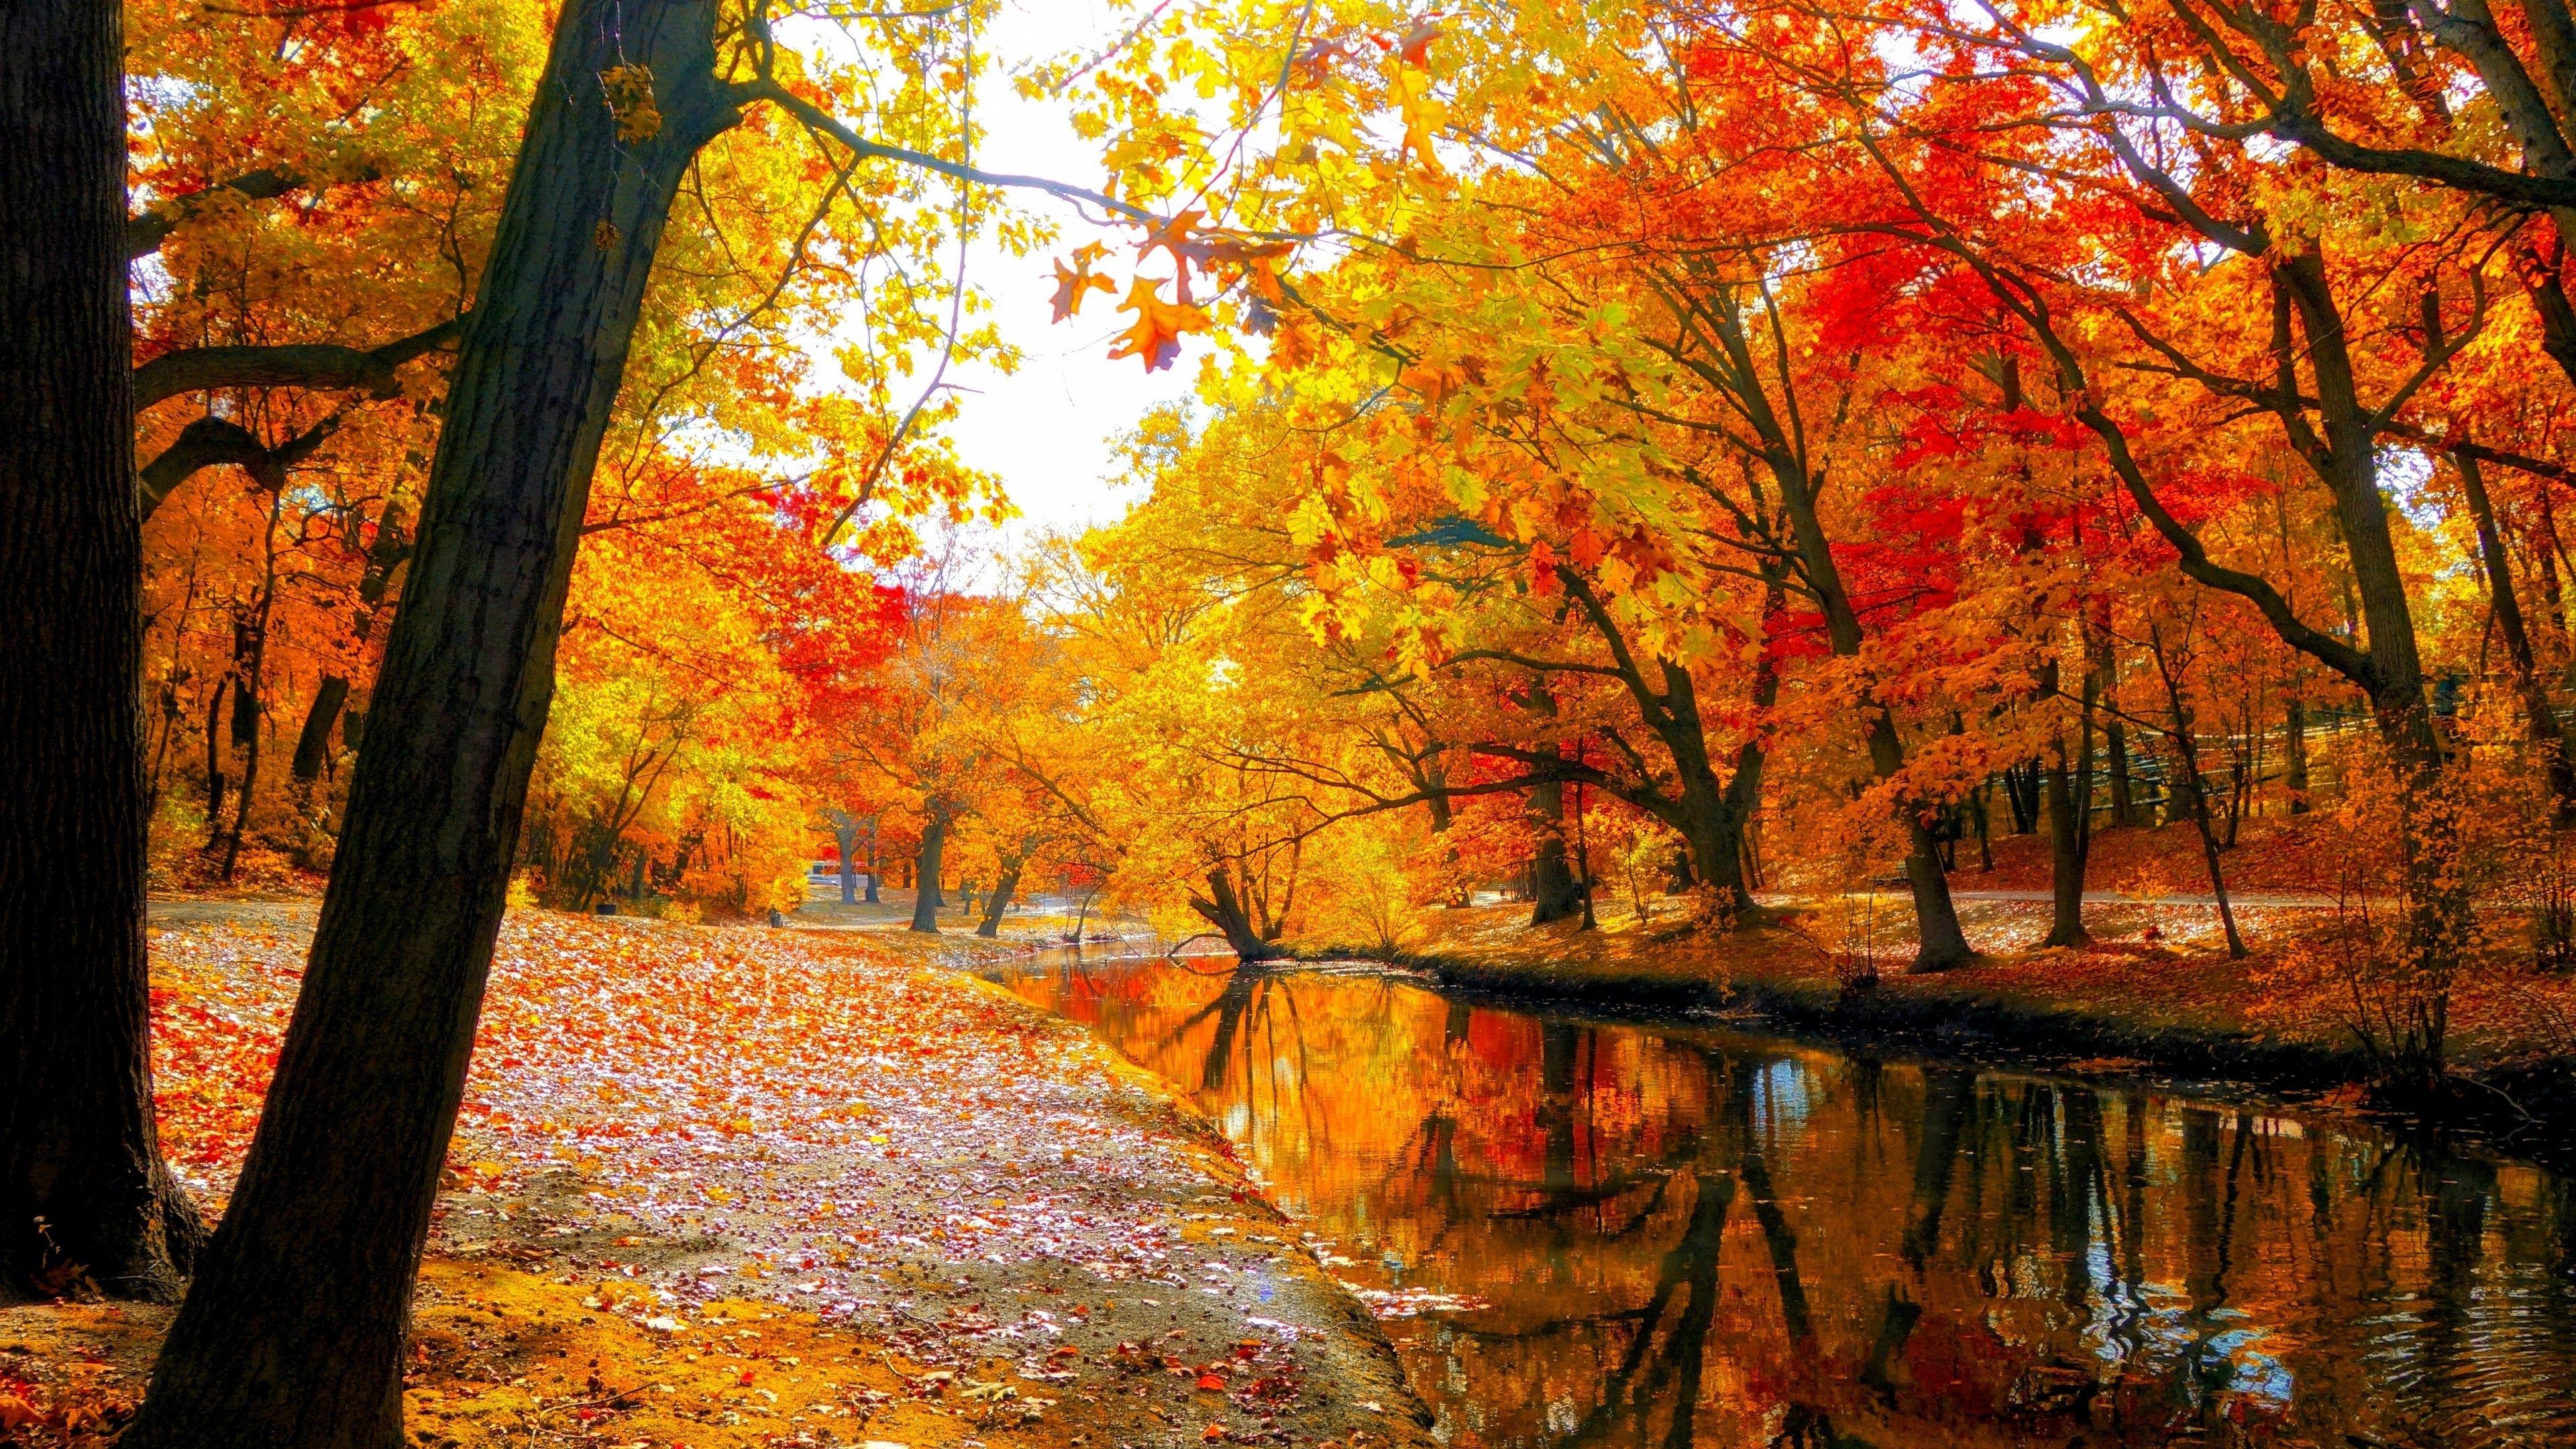 3840 X 2160 Autumn Wallpapers - Top Free 3840 X 2160 Autumn Backgrounds ...